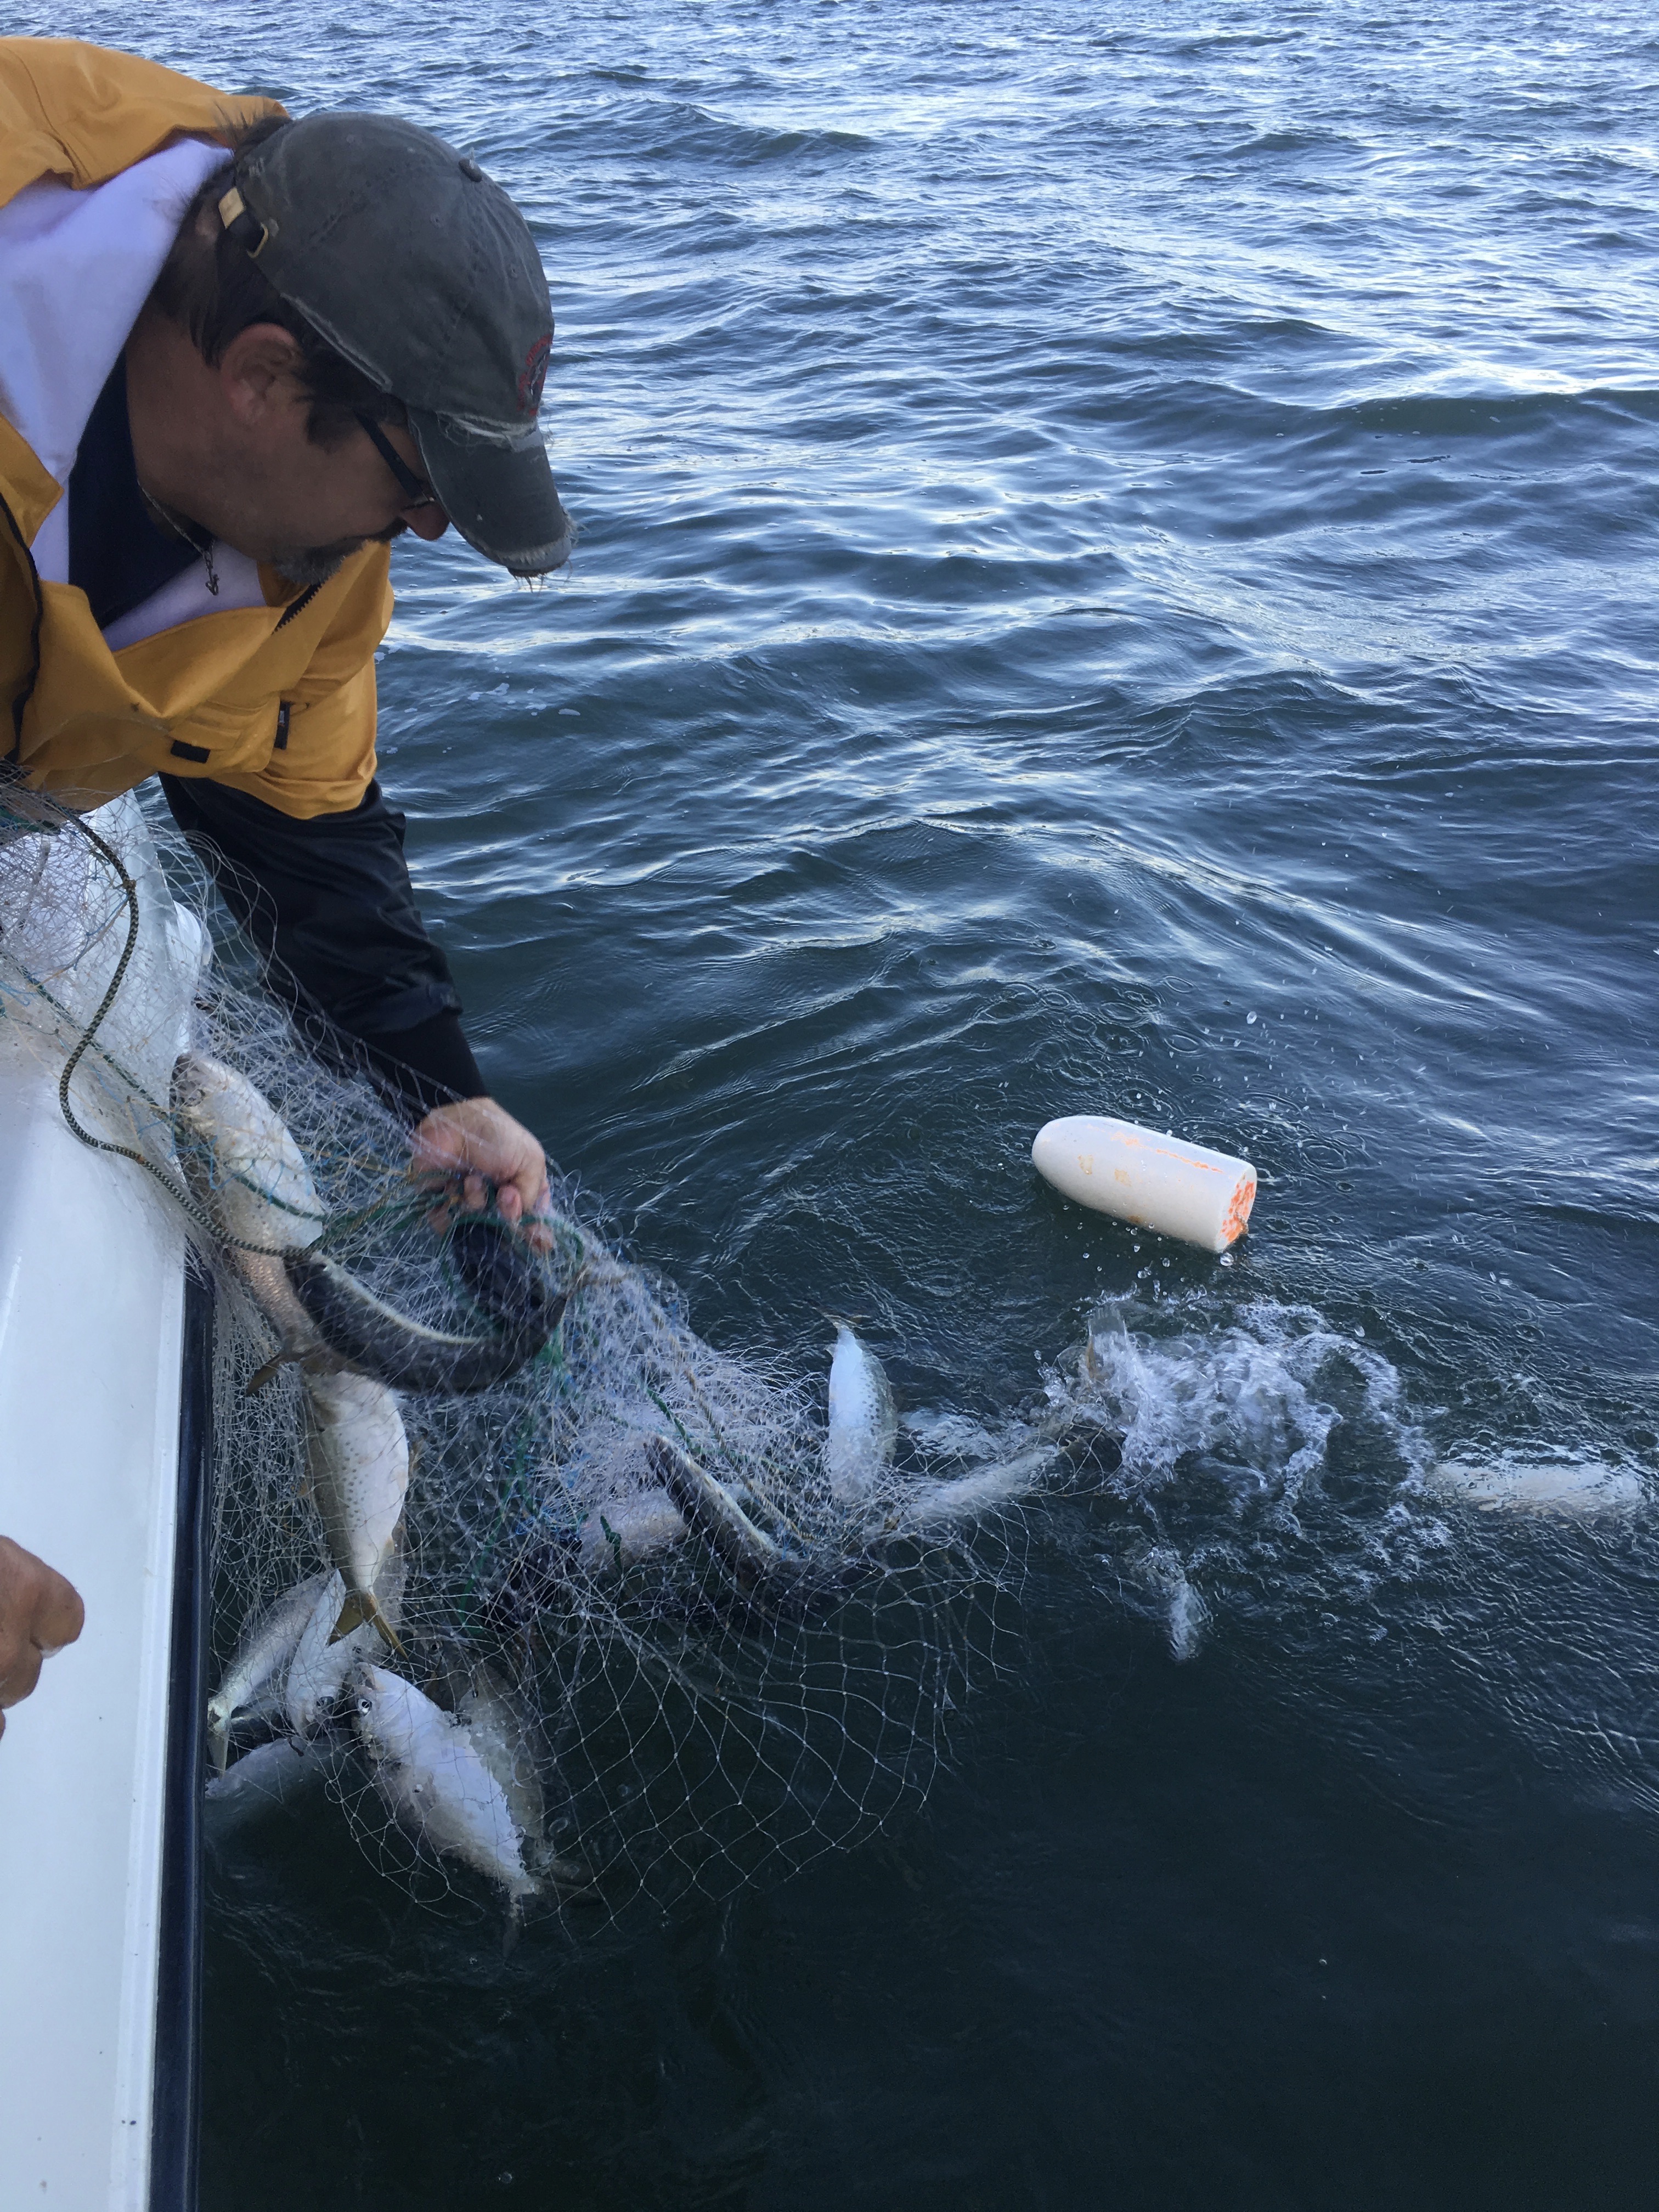 Working a surface gill net for menhaden in August 2016 in Boston Harbor.